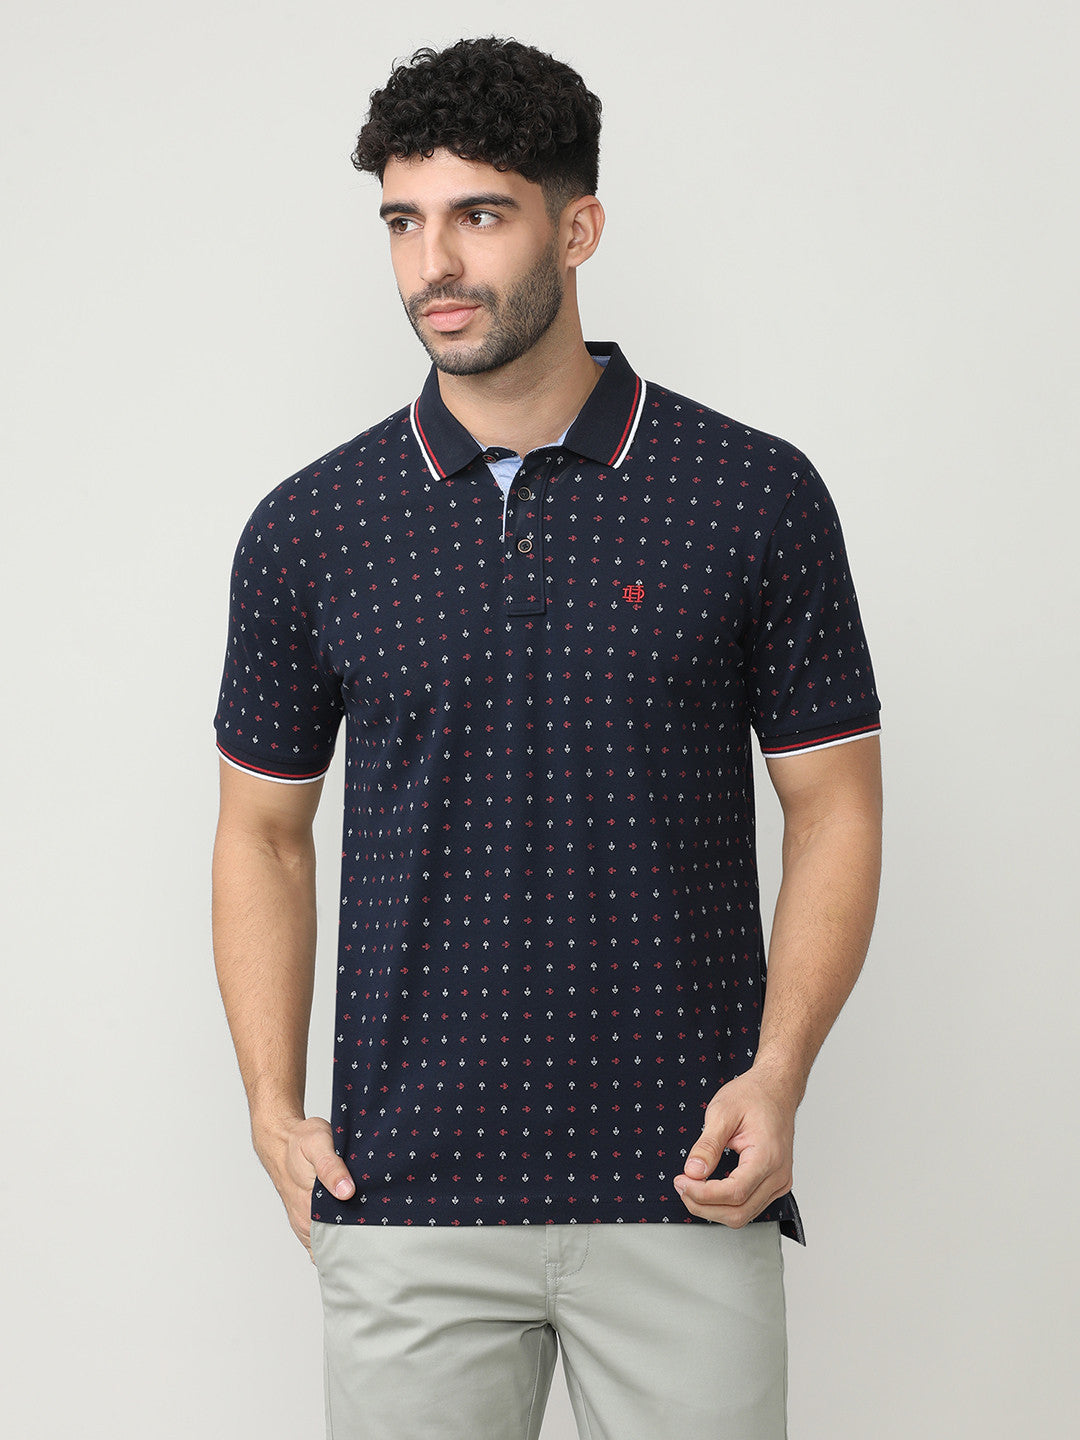 Navy Blue Pique Lycra Printed Polo T-shirt With Tipping Collar